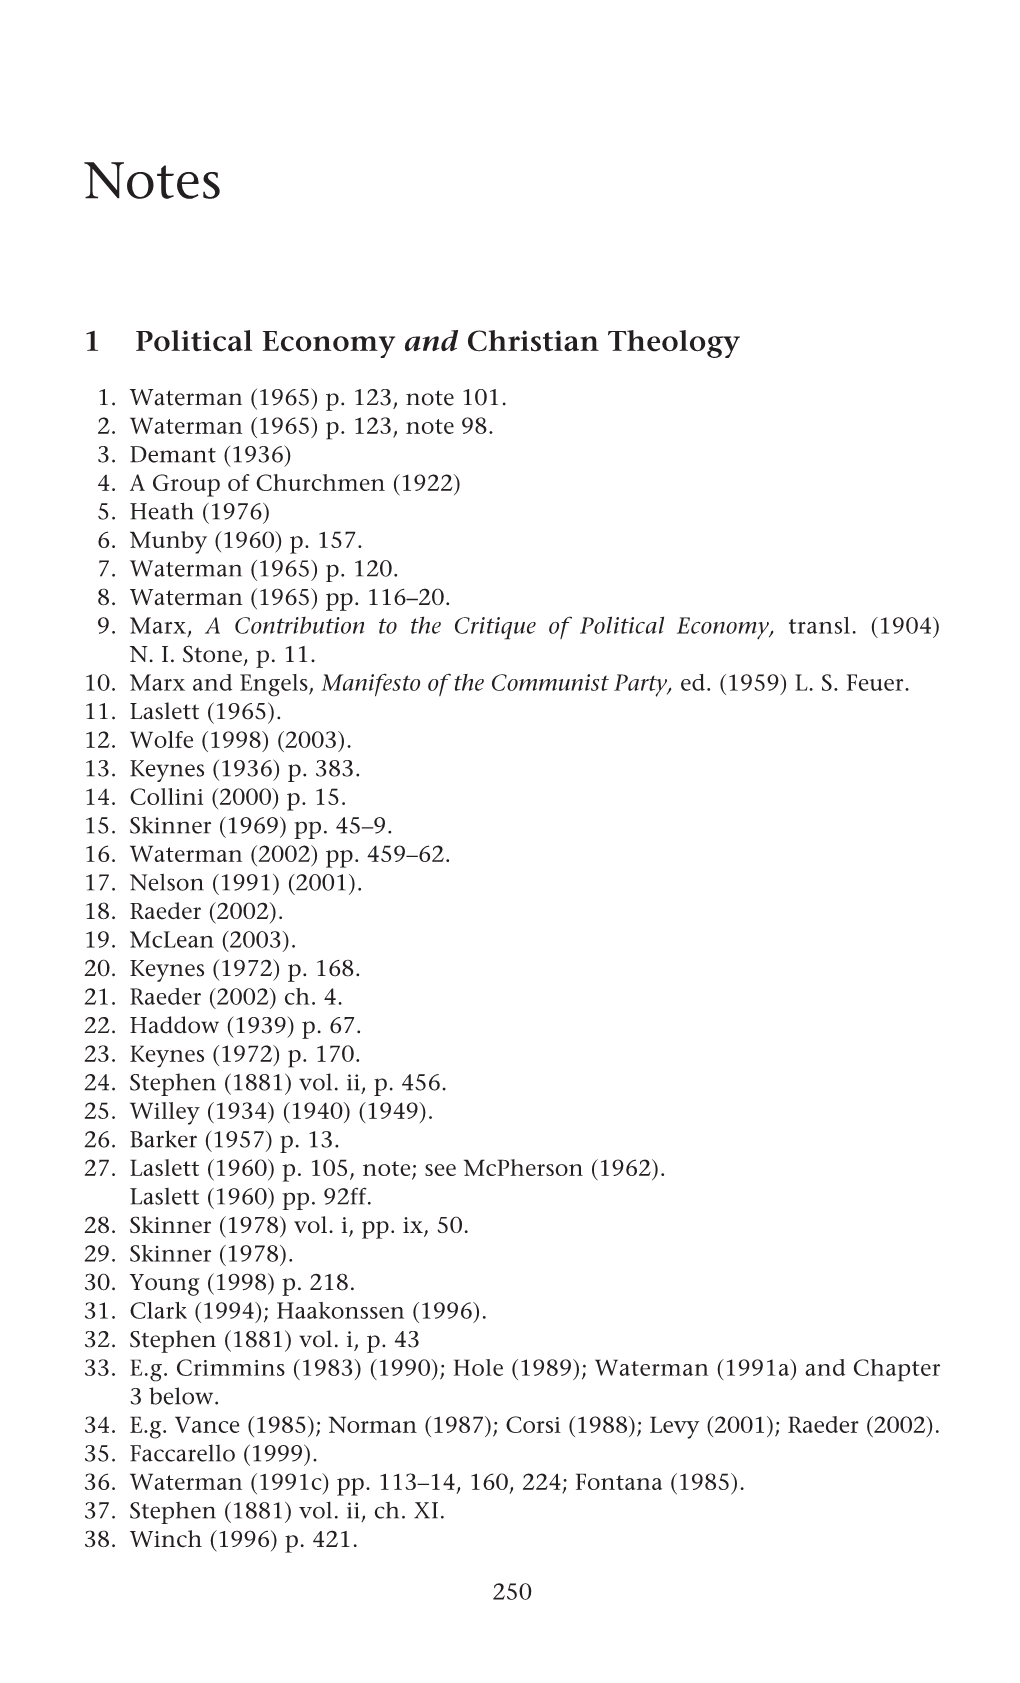 1 Political Economy and Christian Theology